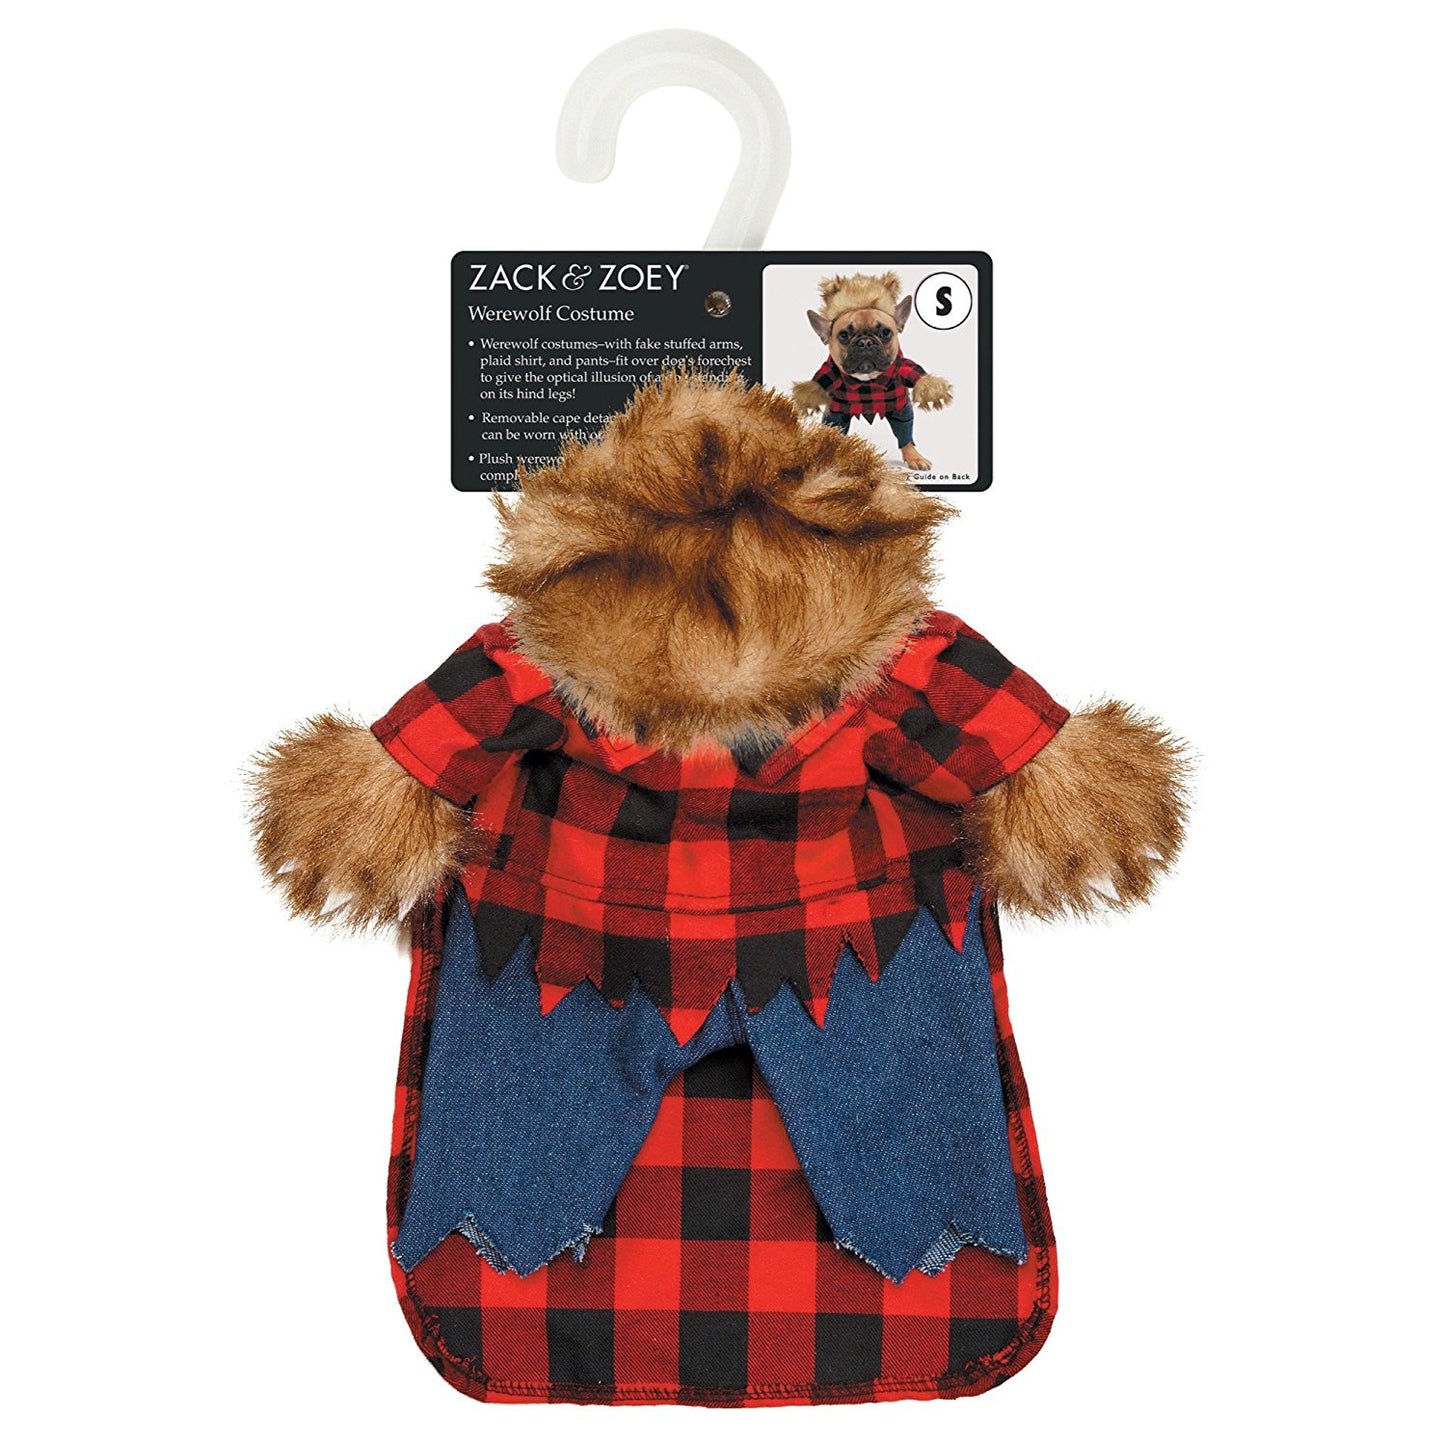 Zack & Zoey Werewolf Costume for Dogs, X-Small